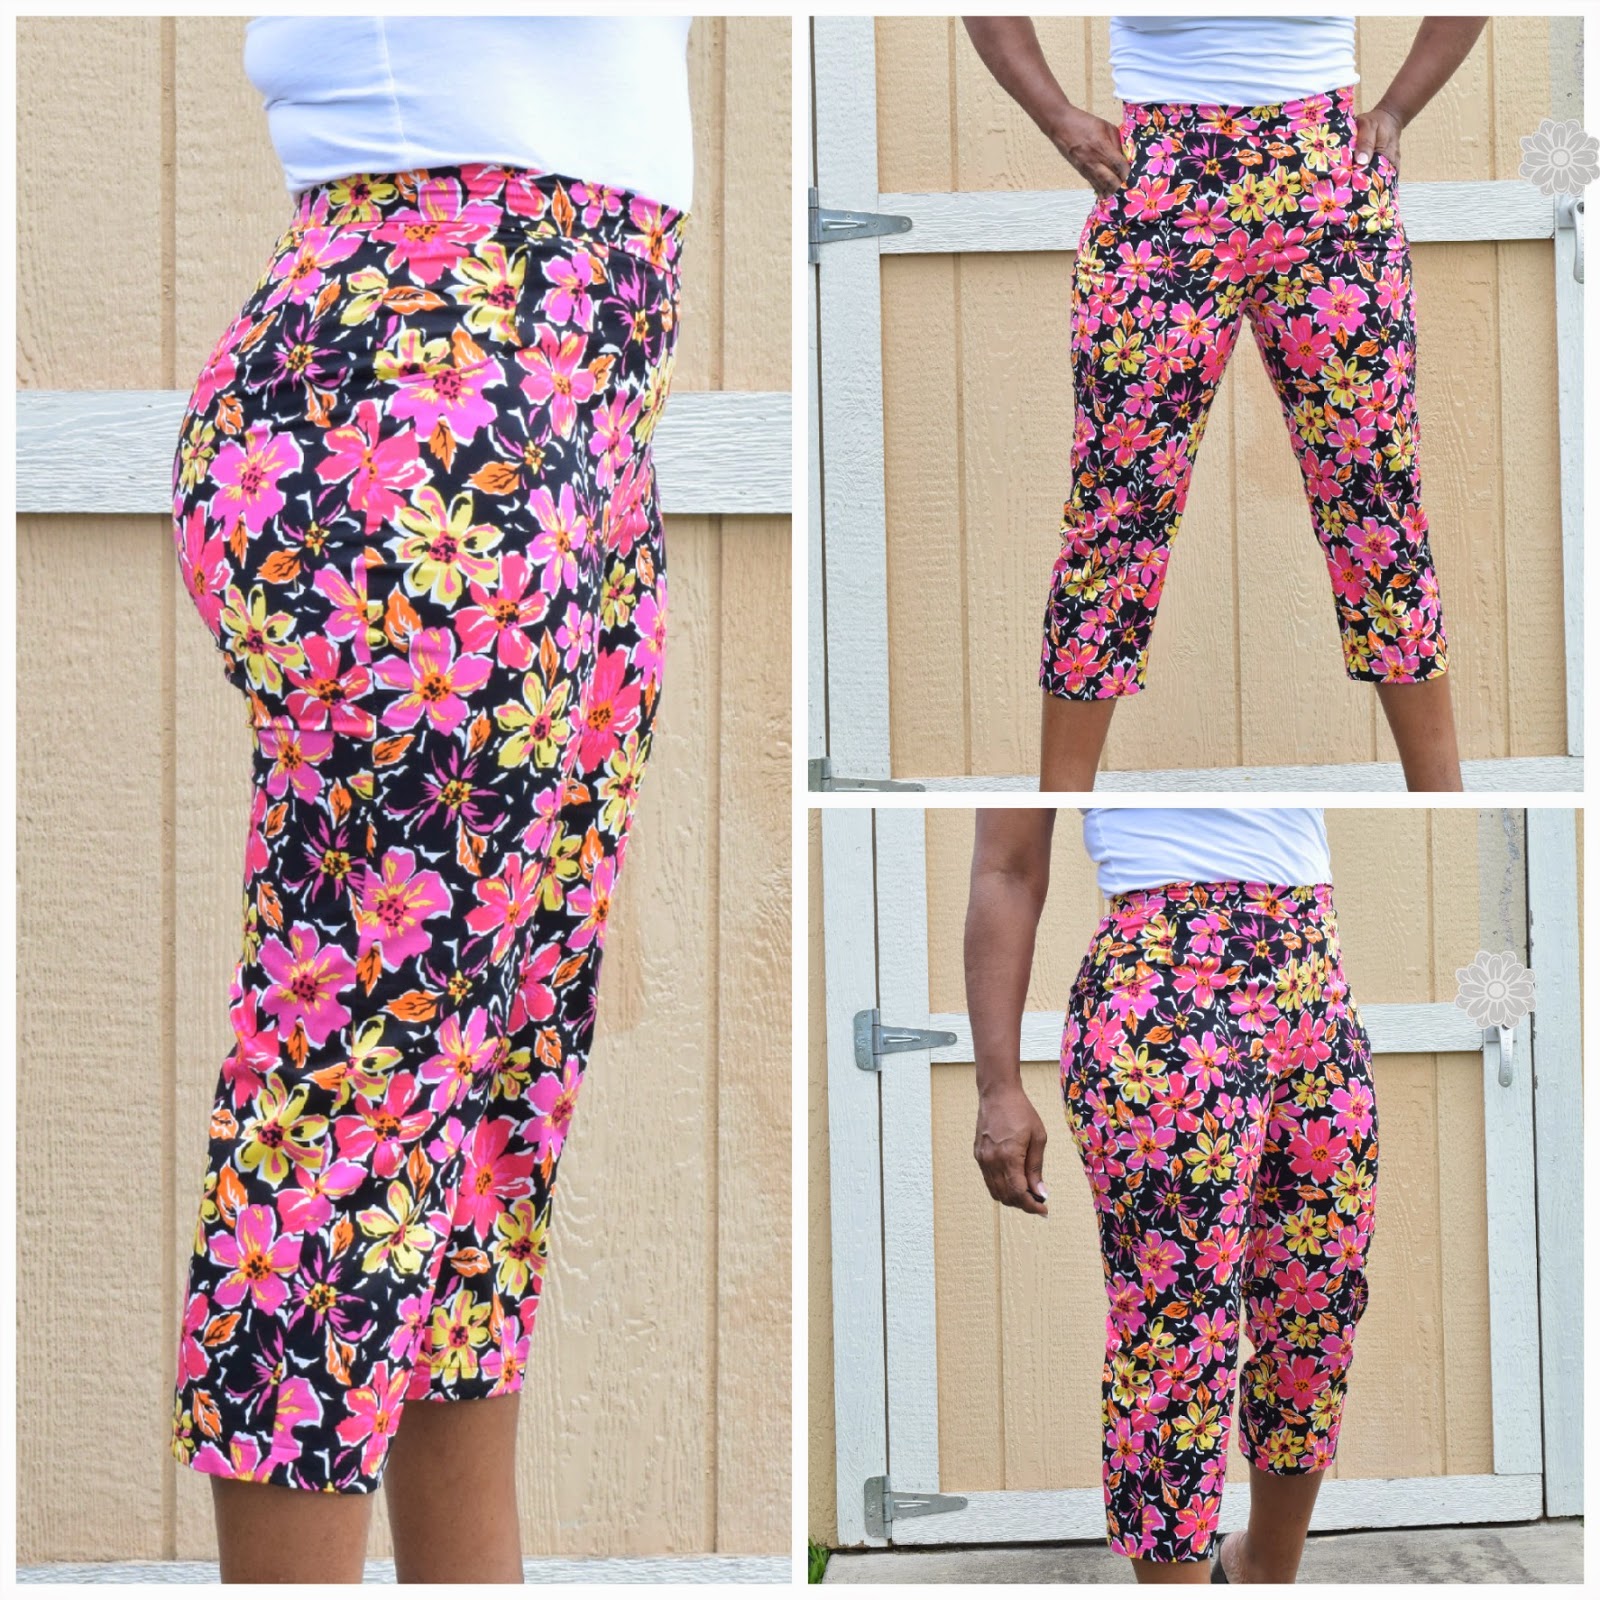 Sew-To-Fit by A.D. Lynn: Contest Entry: Butterick 5895 Crop Pants Review